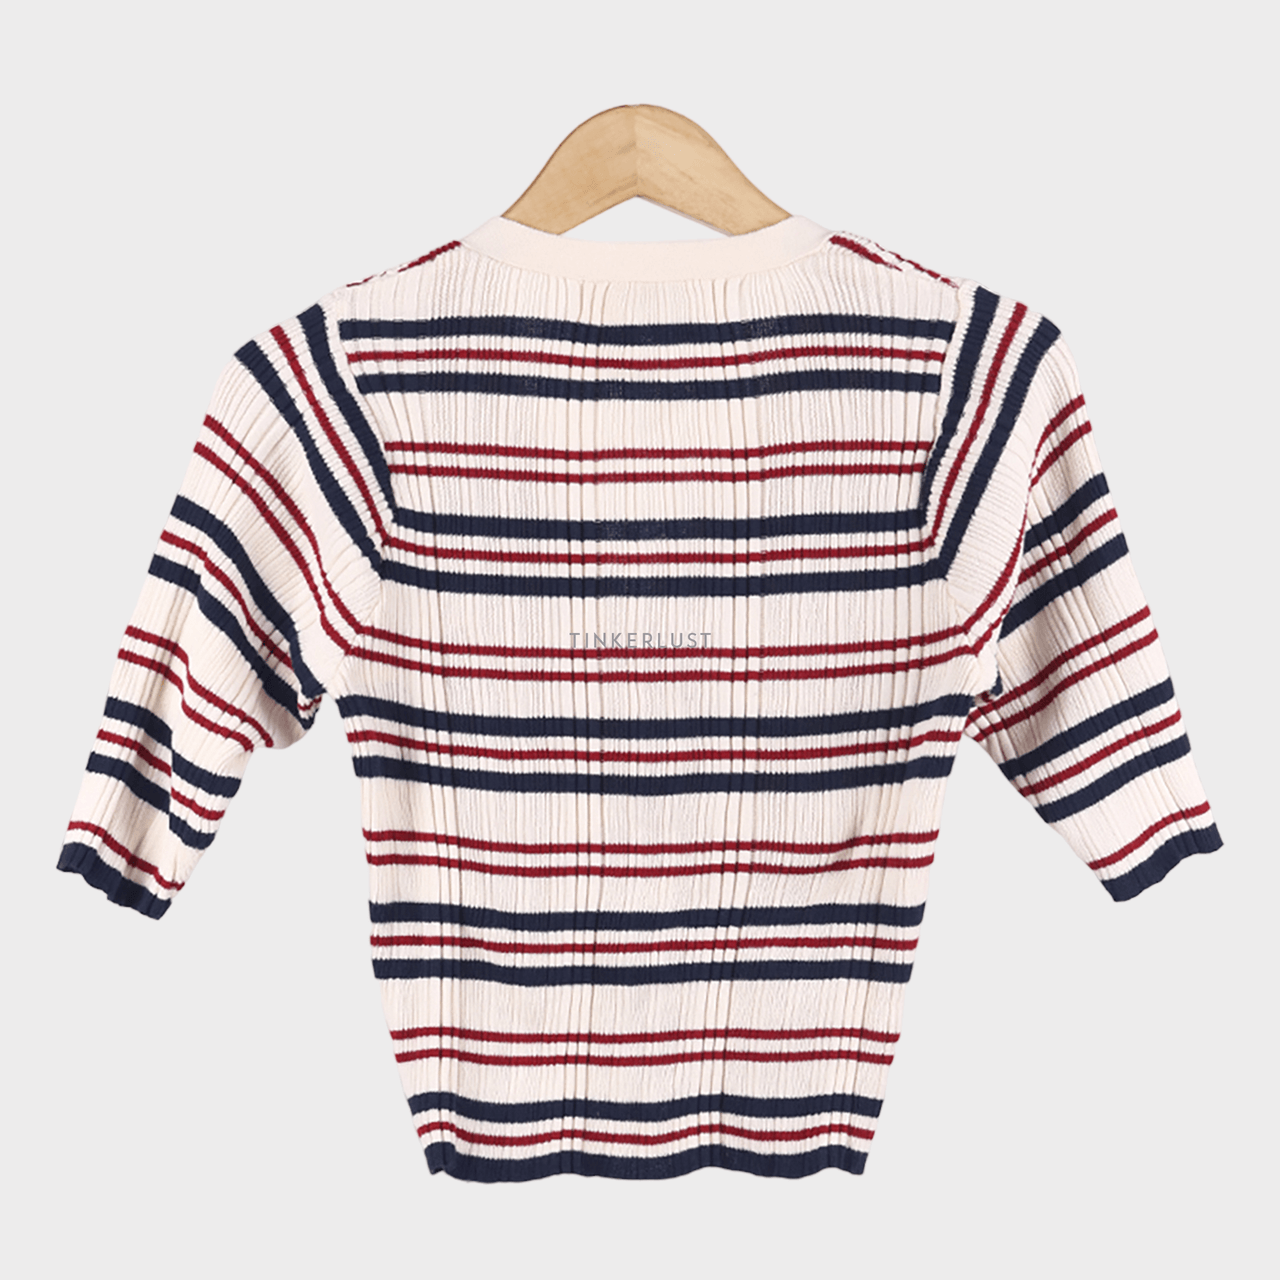 love-and-flair Multi Stripes Cardigan